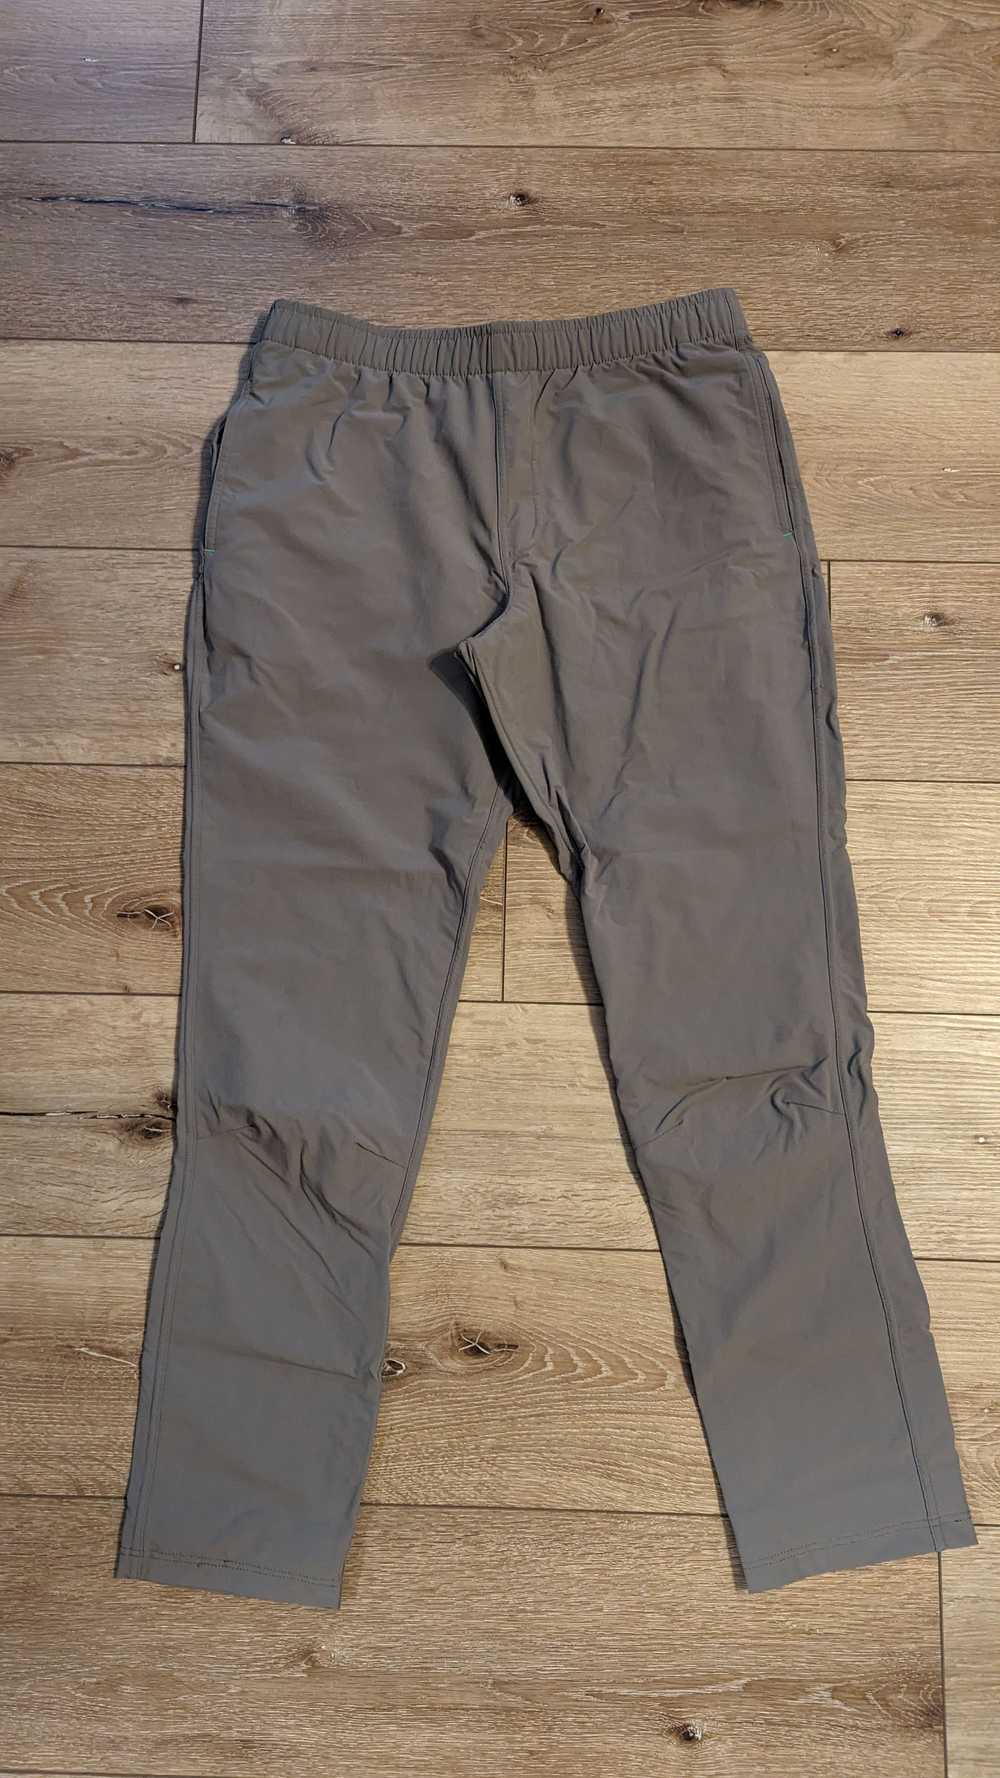 Myles Apparel Everyday Pant in Fog - image 7